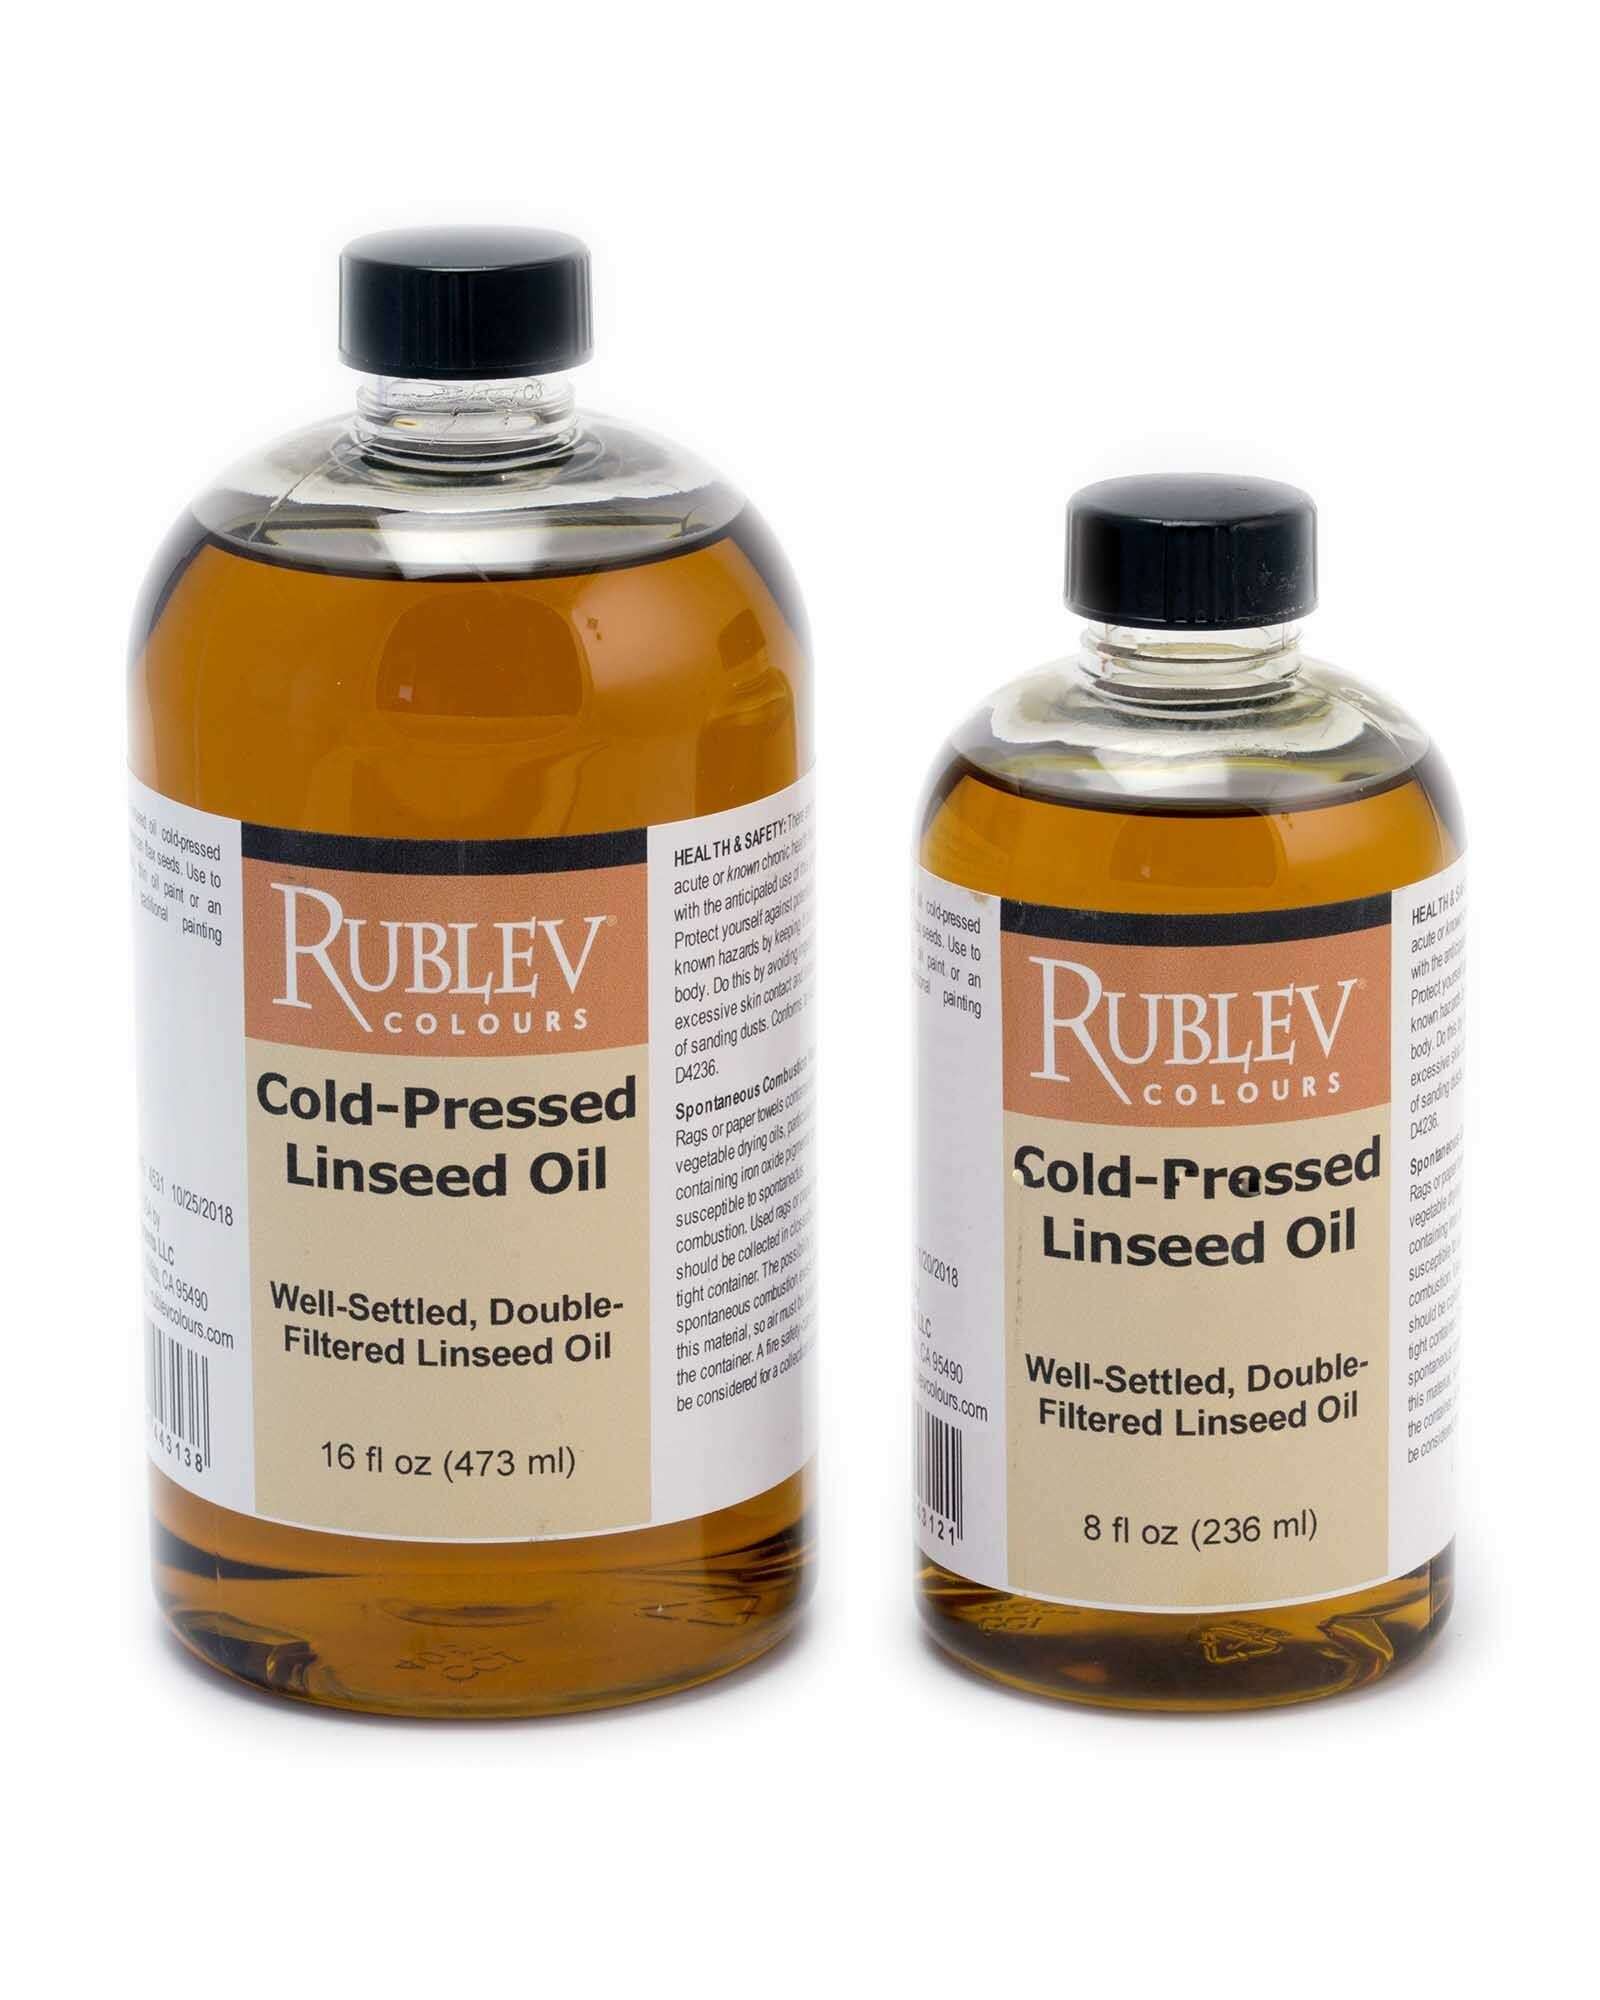 How to use linseed oil and turpentine for oil painting? Do I mix them with  the paint or do I use them like how I use water for watercolor - Quora